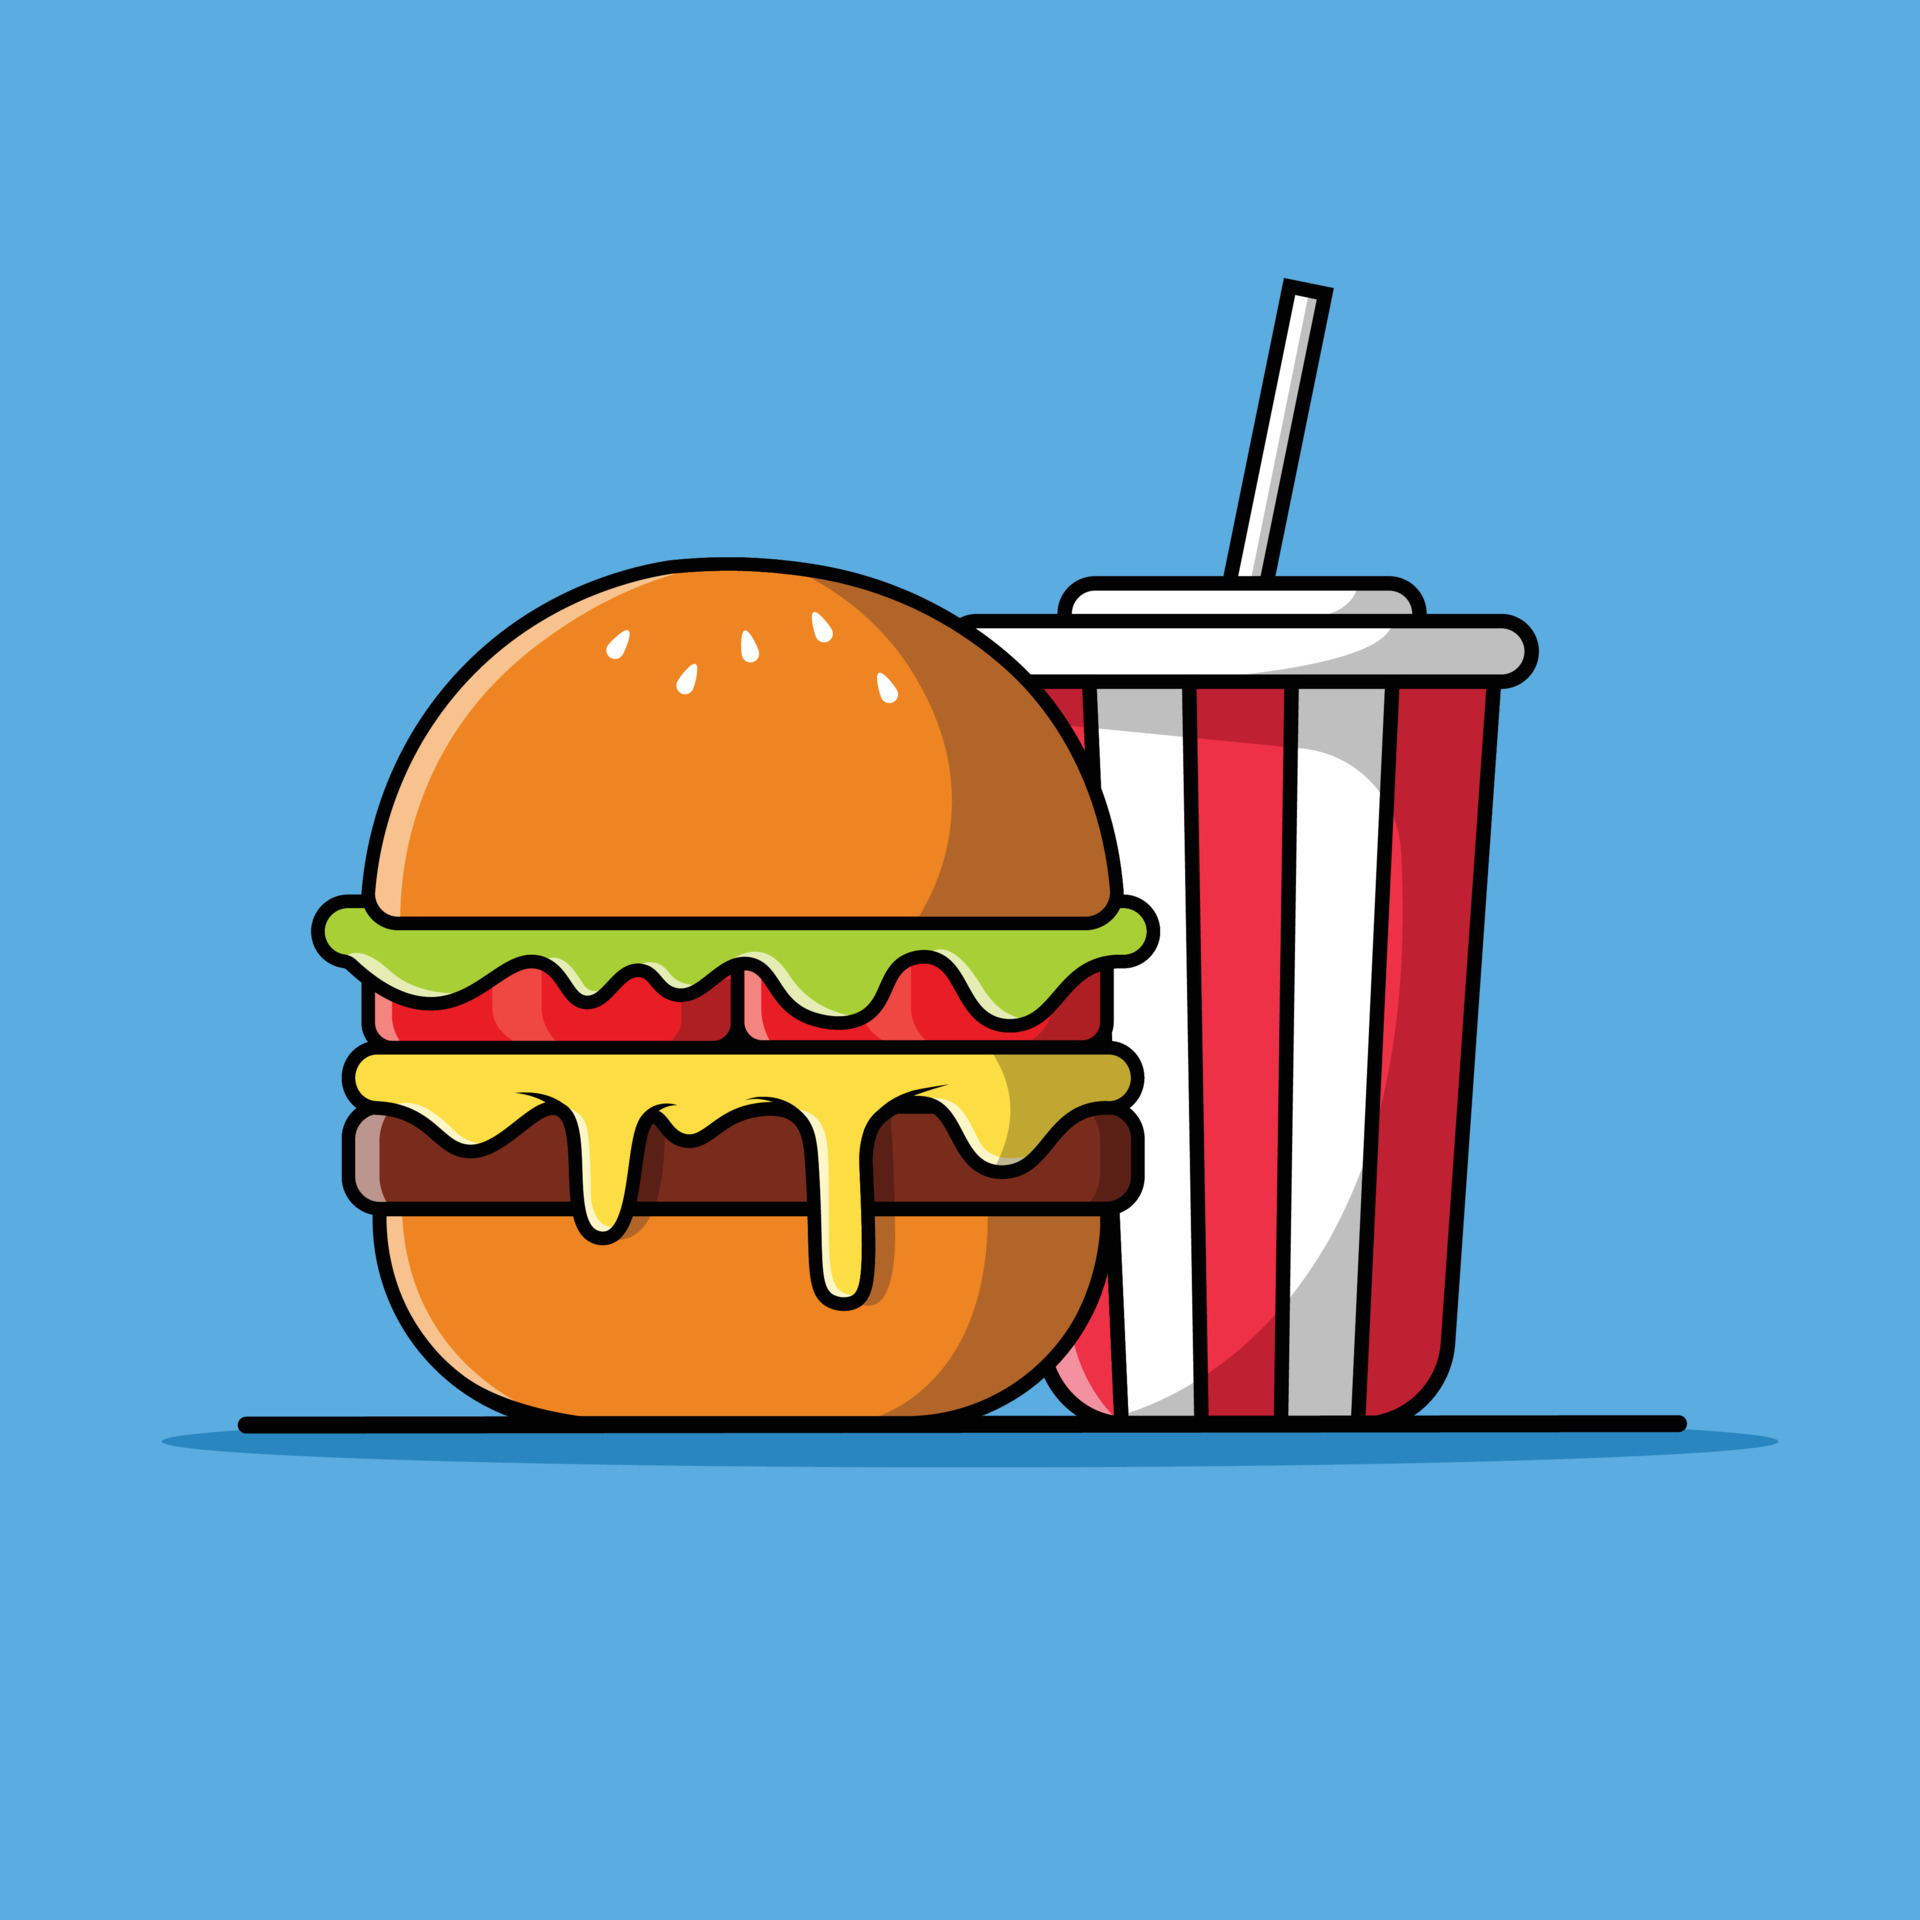 https://static.vecteezy.com/system/resources/previews/006/621/014/original/burger-with-soda-and-ice-illustration-hamburger-fast-food-logo-cafe-and-restaurant-menu-flat-cartoon-style-suitable-for-web-landing-page-banner-flyer-sticker-card-background-vector.jpg